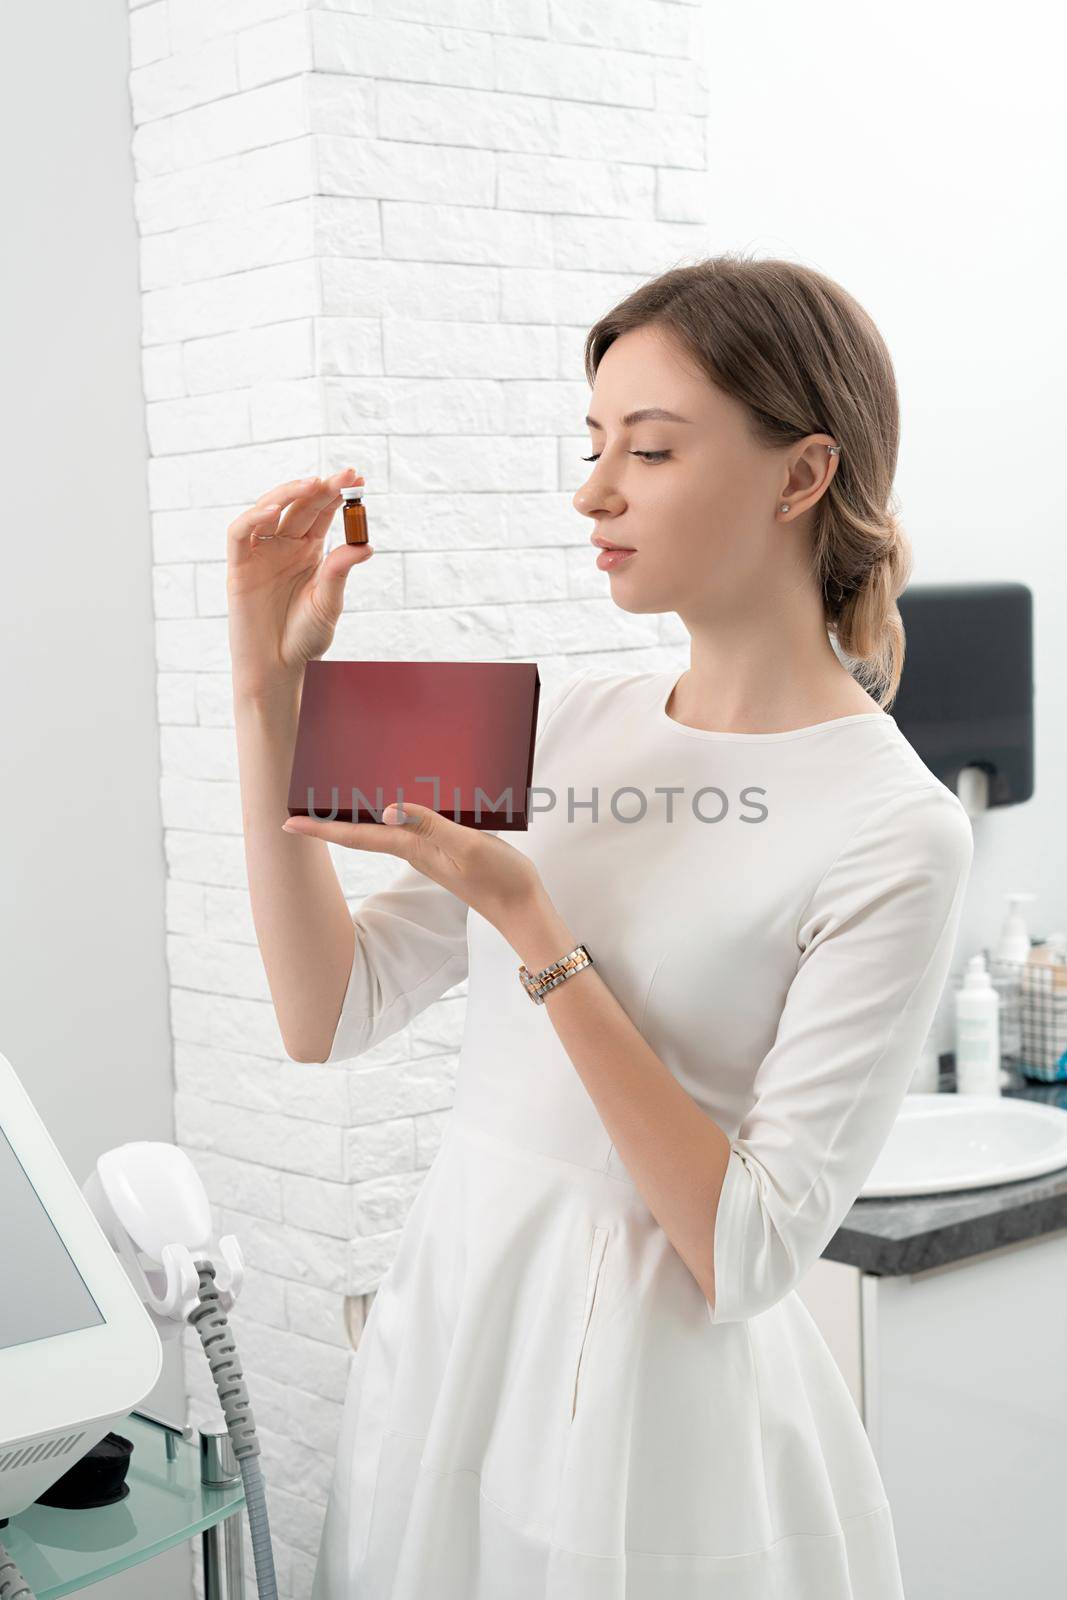 Cosmetologist dermatologist holds a package with drugs for facial rejuvenation. A female doctor in office shows treatment options. Mockup with copy space by Mariakray